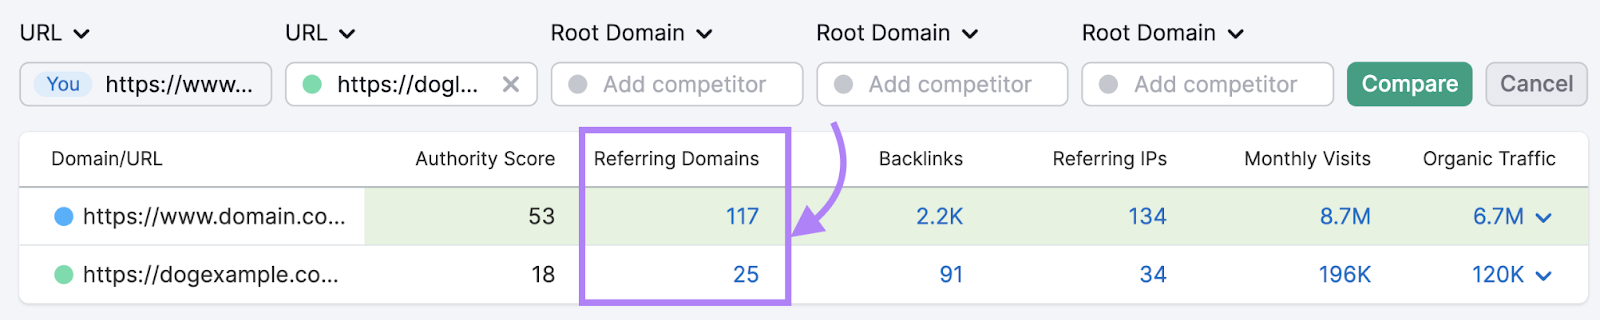 number of referring domains metric shown for two different domains